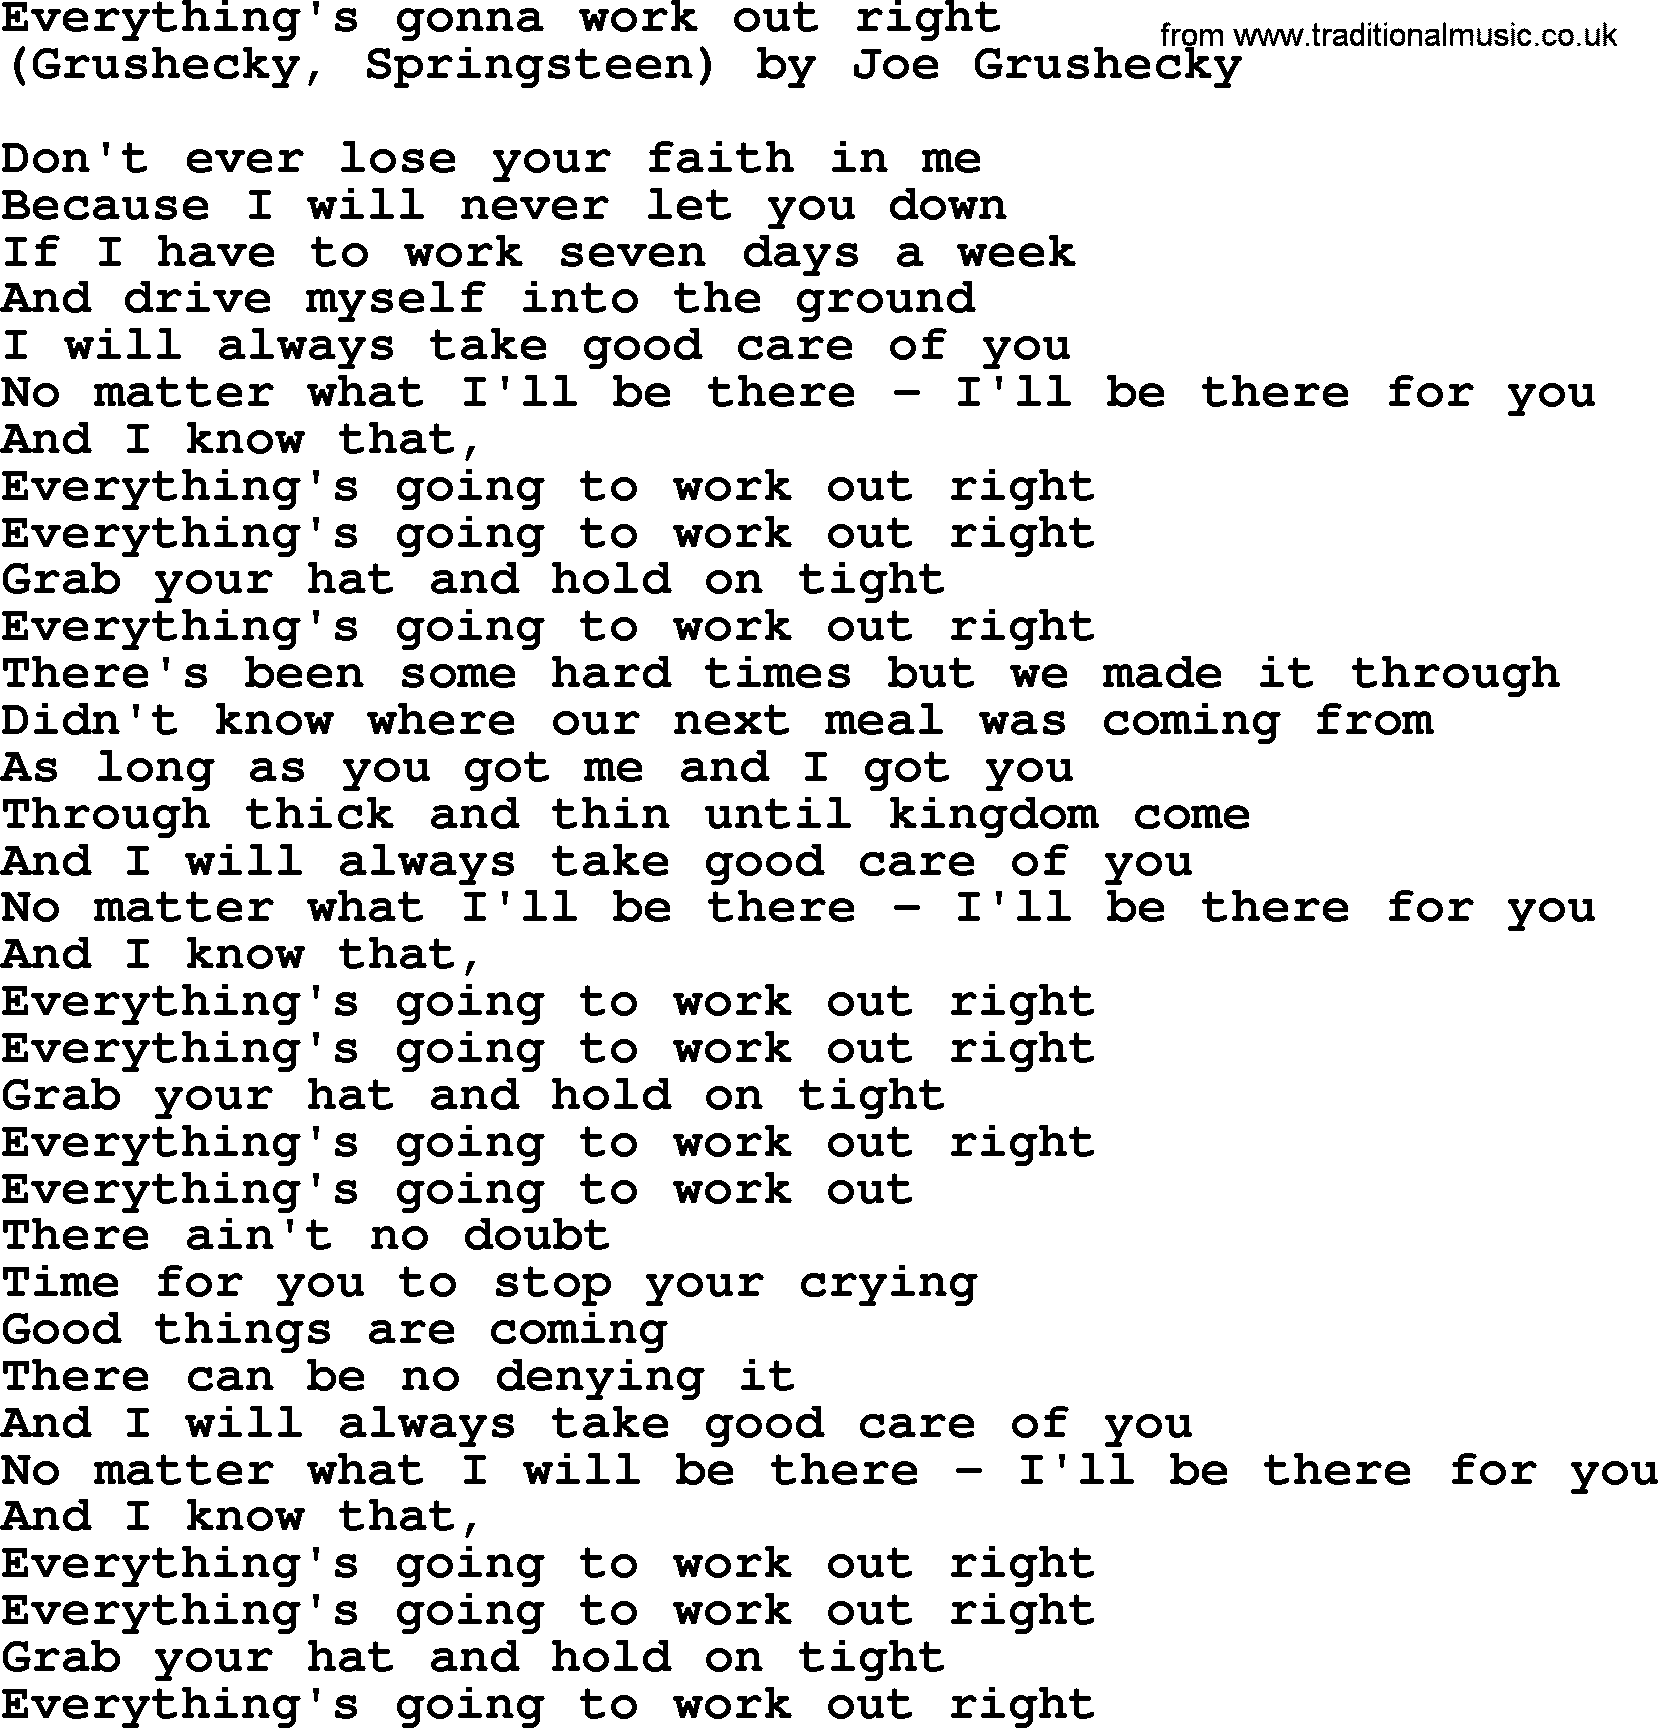 Bruce Springsteen song: Everything's Gonna Work Out Right lyrics